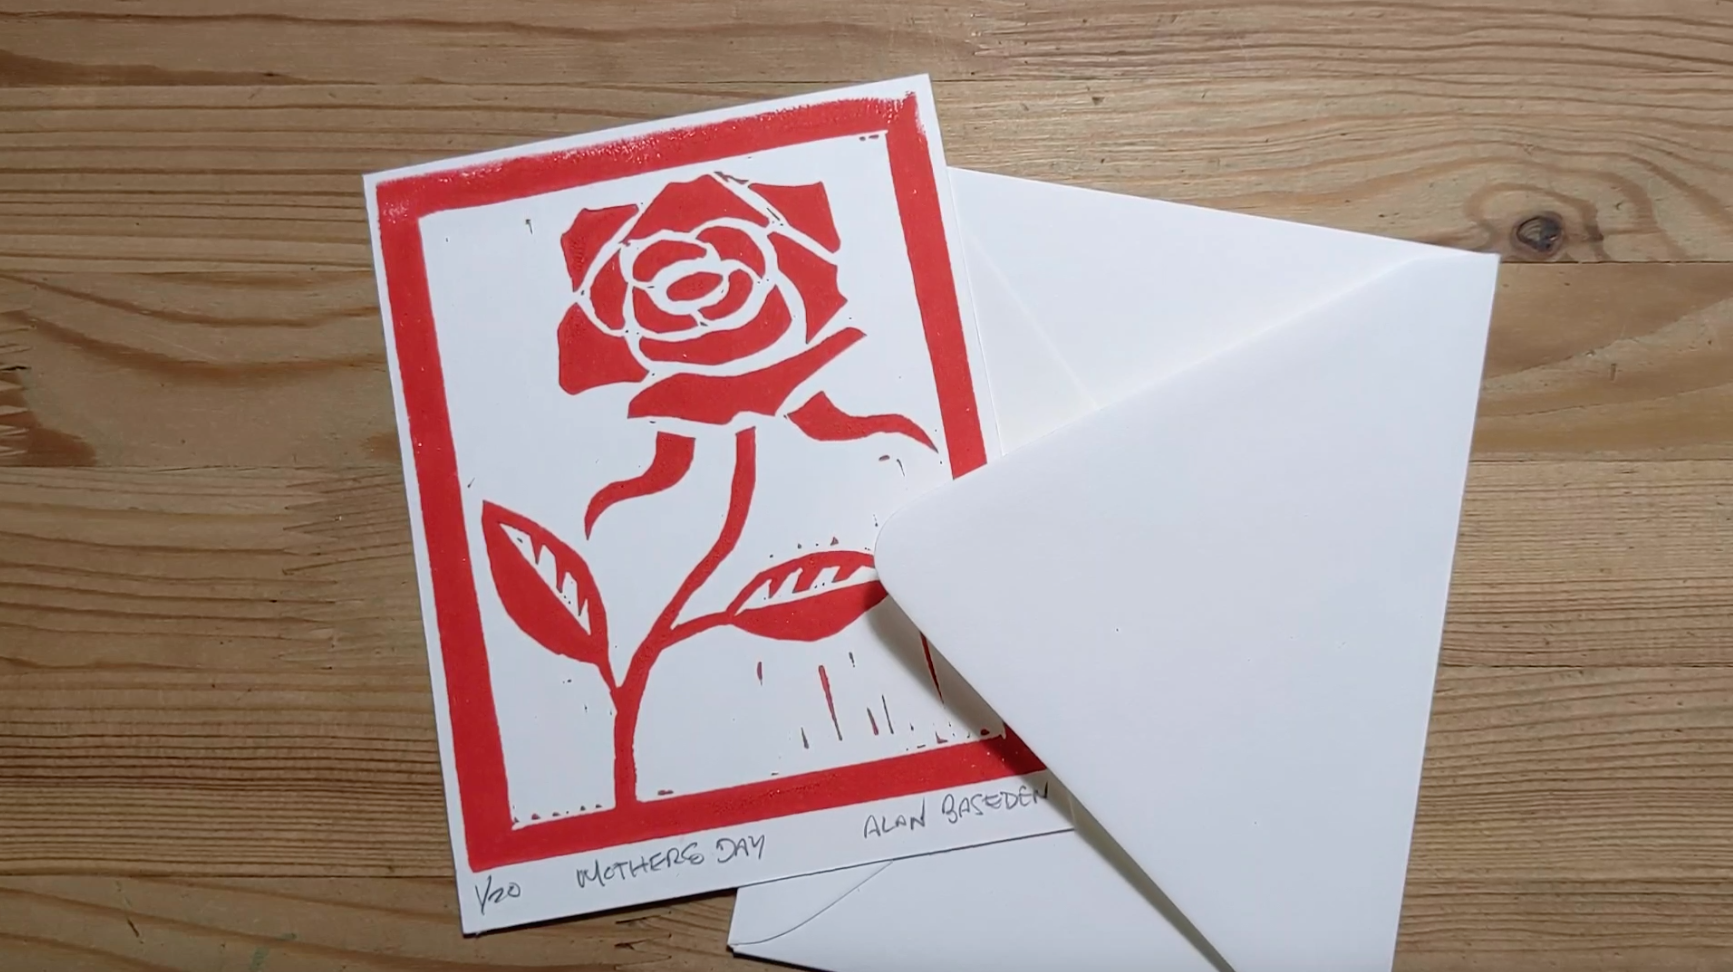 A greeting card with a red rose linocut print, and an envelope, on a wood table